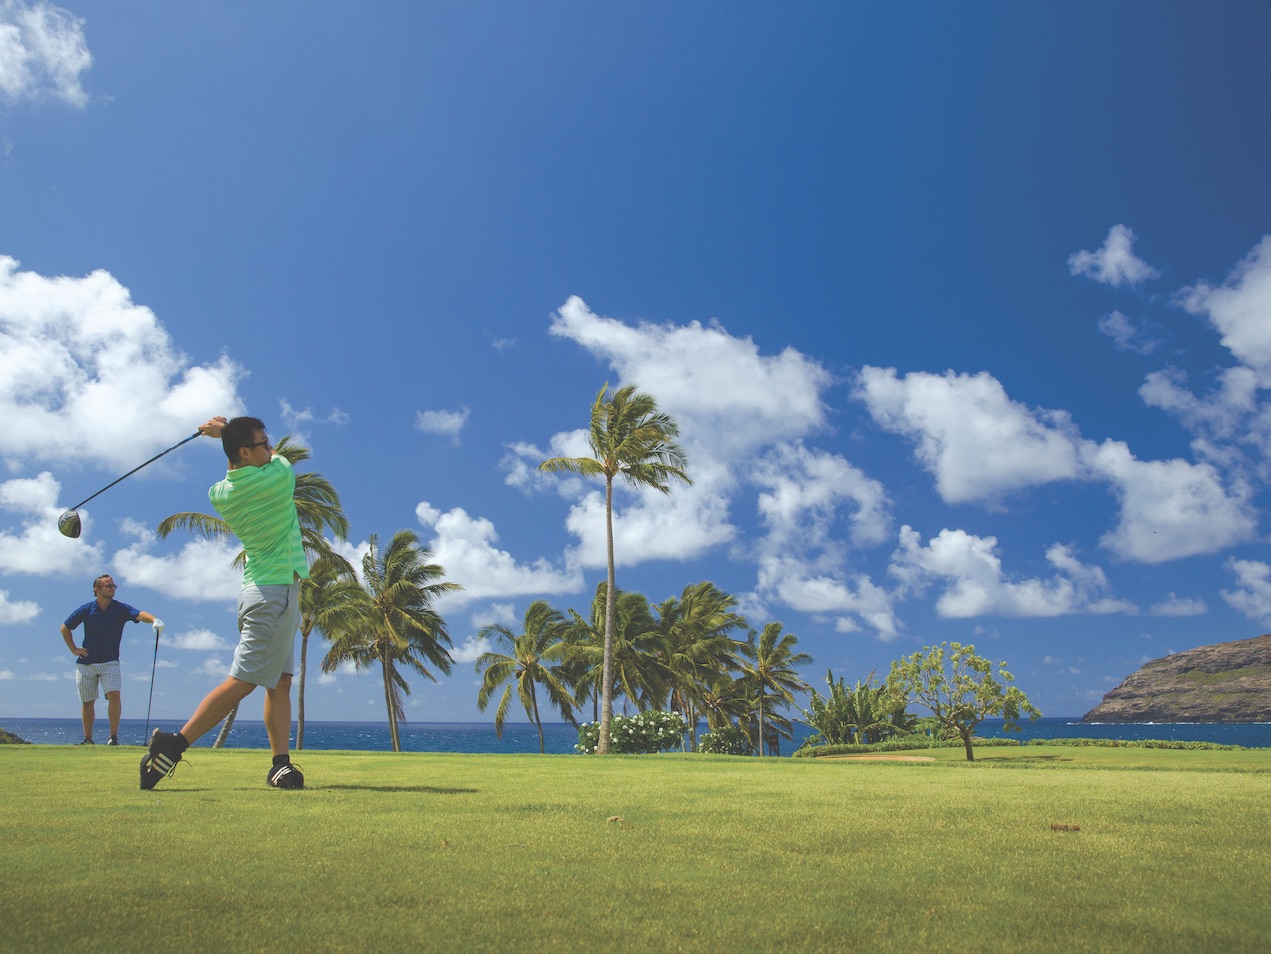 Man in green shirt teeing off on tropical island golf course